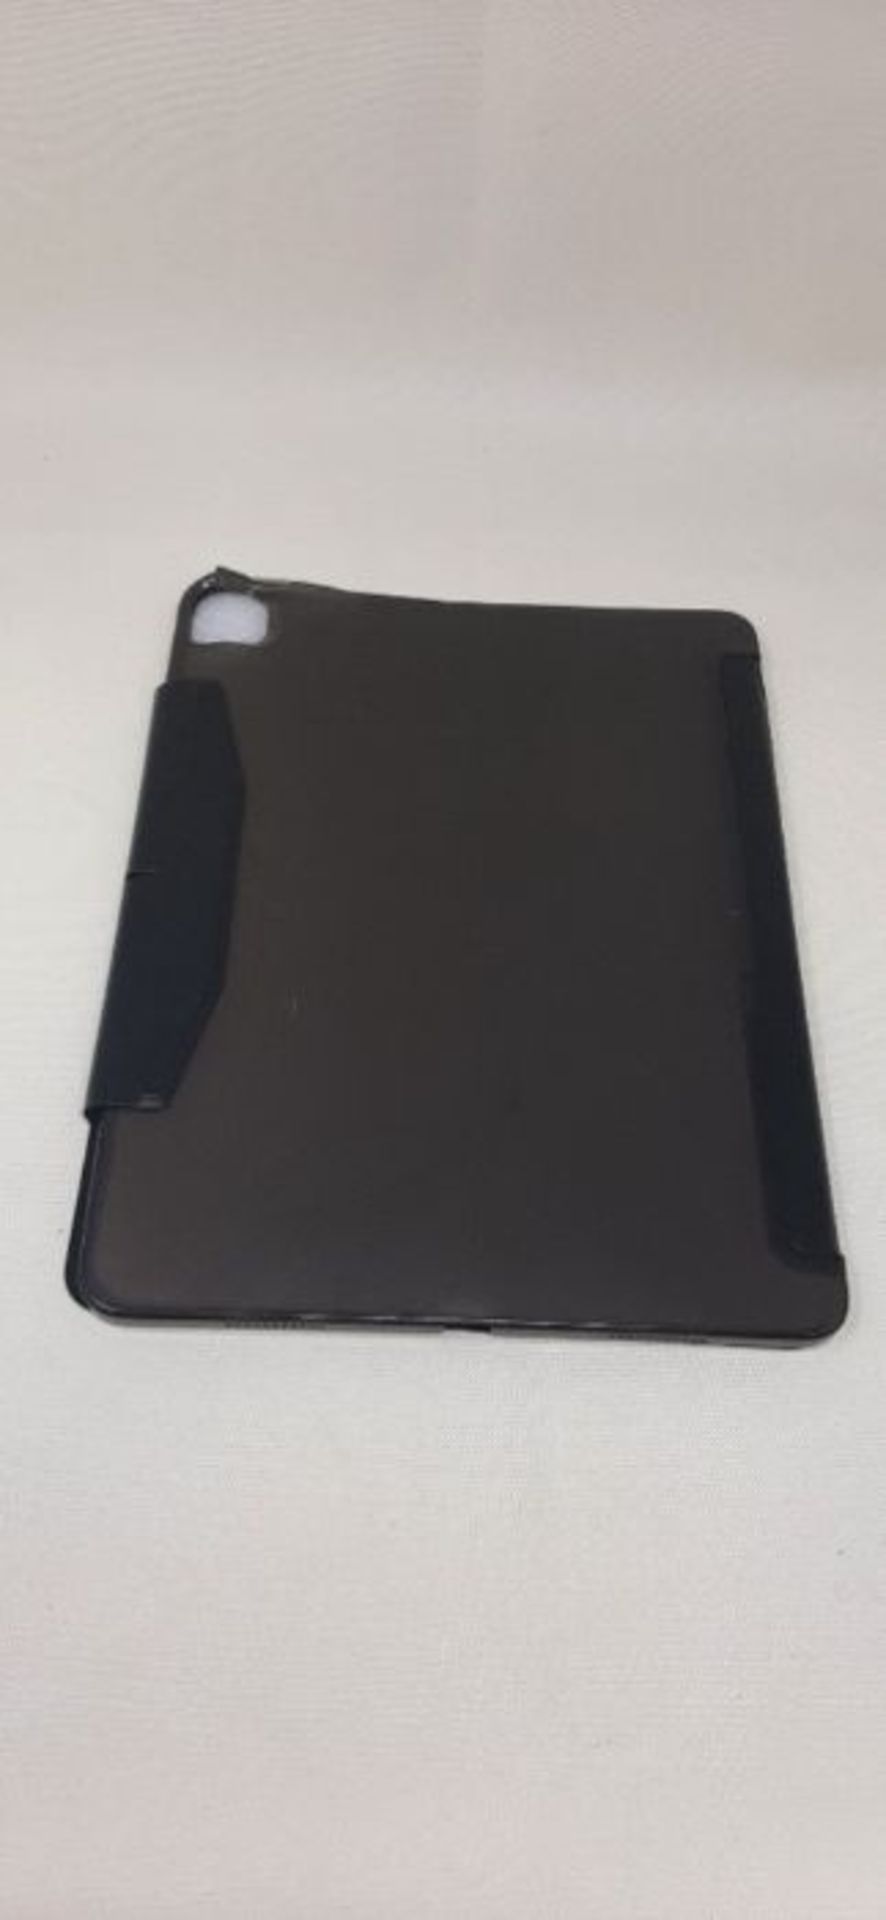 ESR Case Compatible with iPad Pro 12.9 Inch 2021 (5th Generation, 5G), Translucent Sta - Image 3 of 3